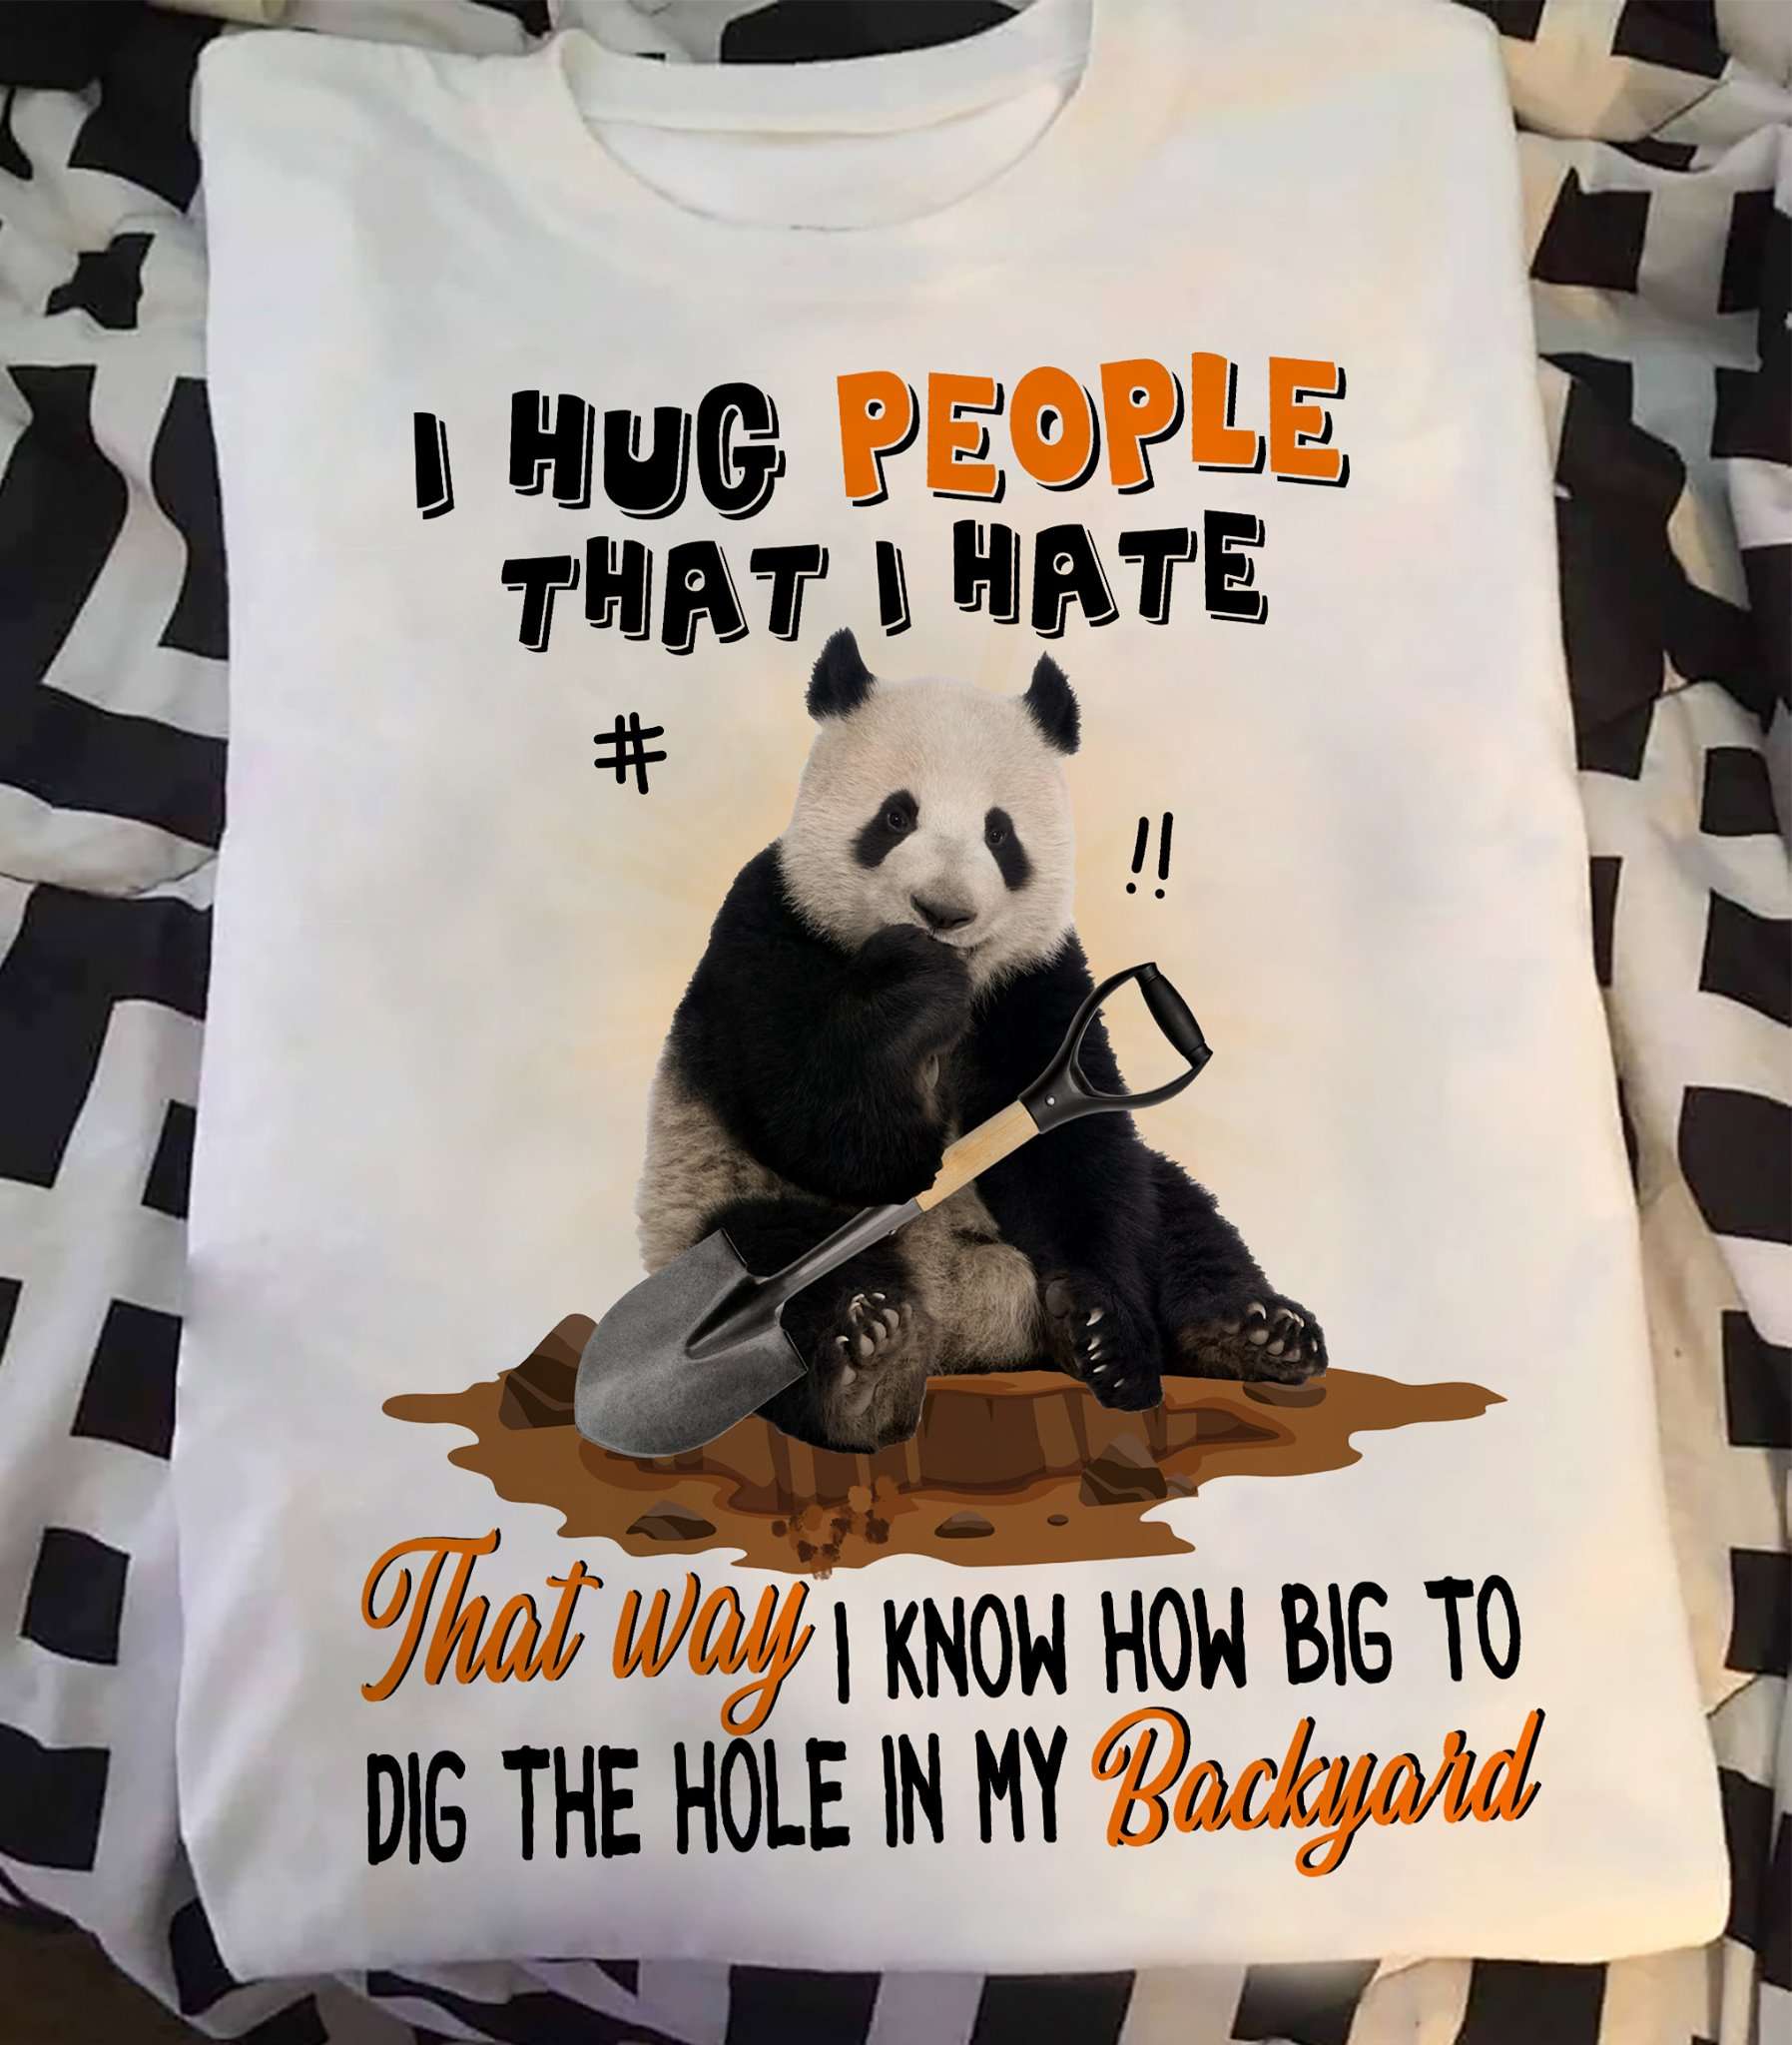 Digging Panda - I hus people that i hate that way i know how big to dig the hole in my backyard